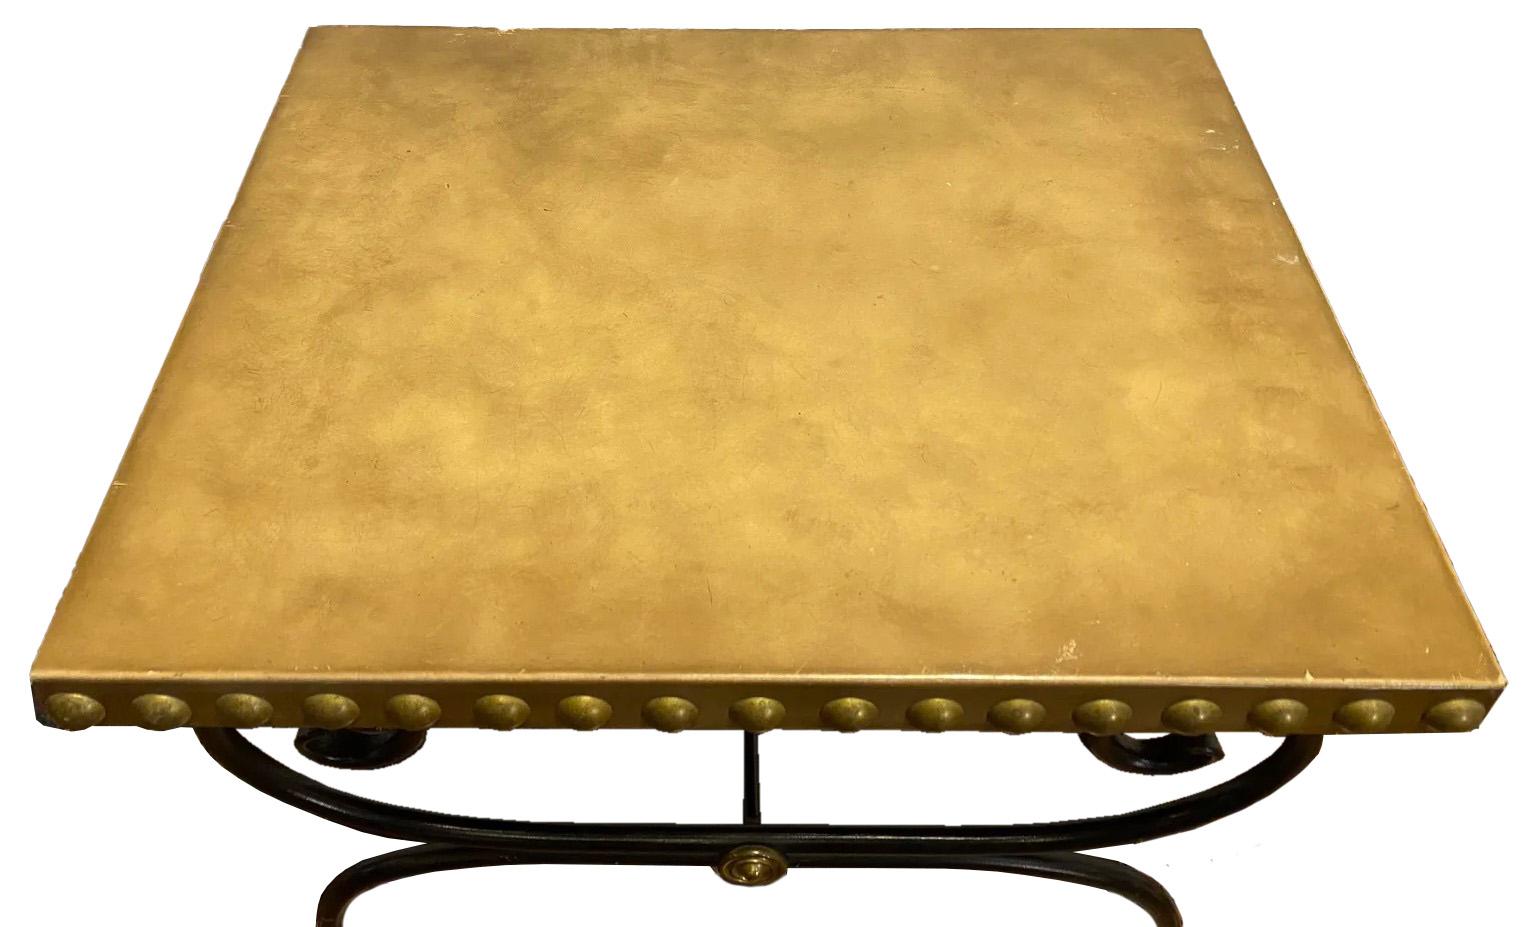 An exquisite piece that embodies the epitome of French elegance and craftsmanship - a French Maison Jansen style table. This table is a masterpiece of design, featuring a luxurious leather-wrapped tabletop that immediately catches the eye,